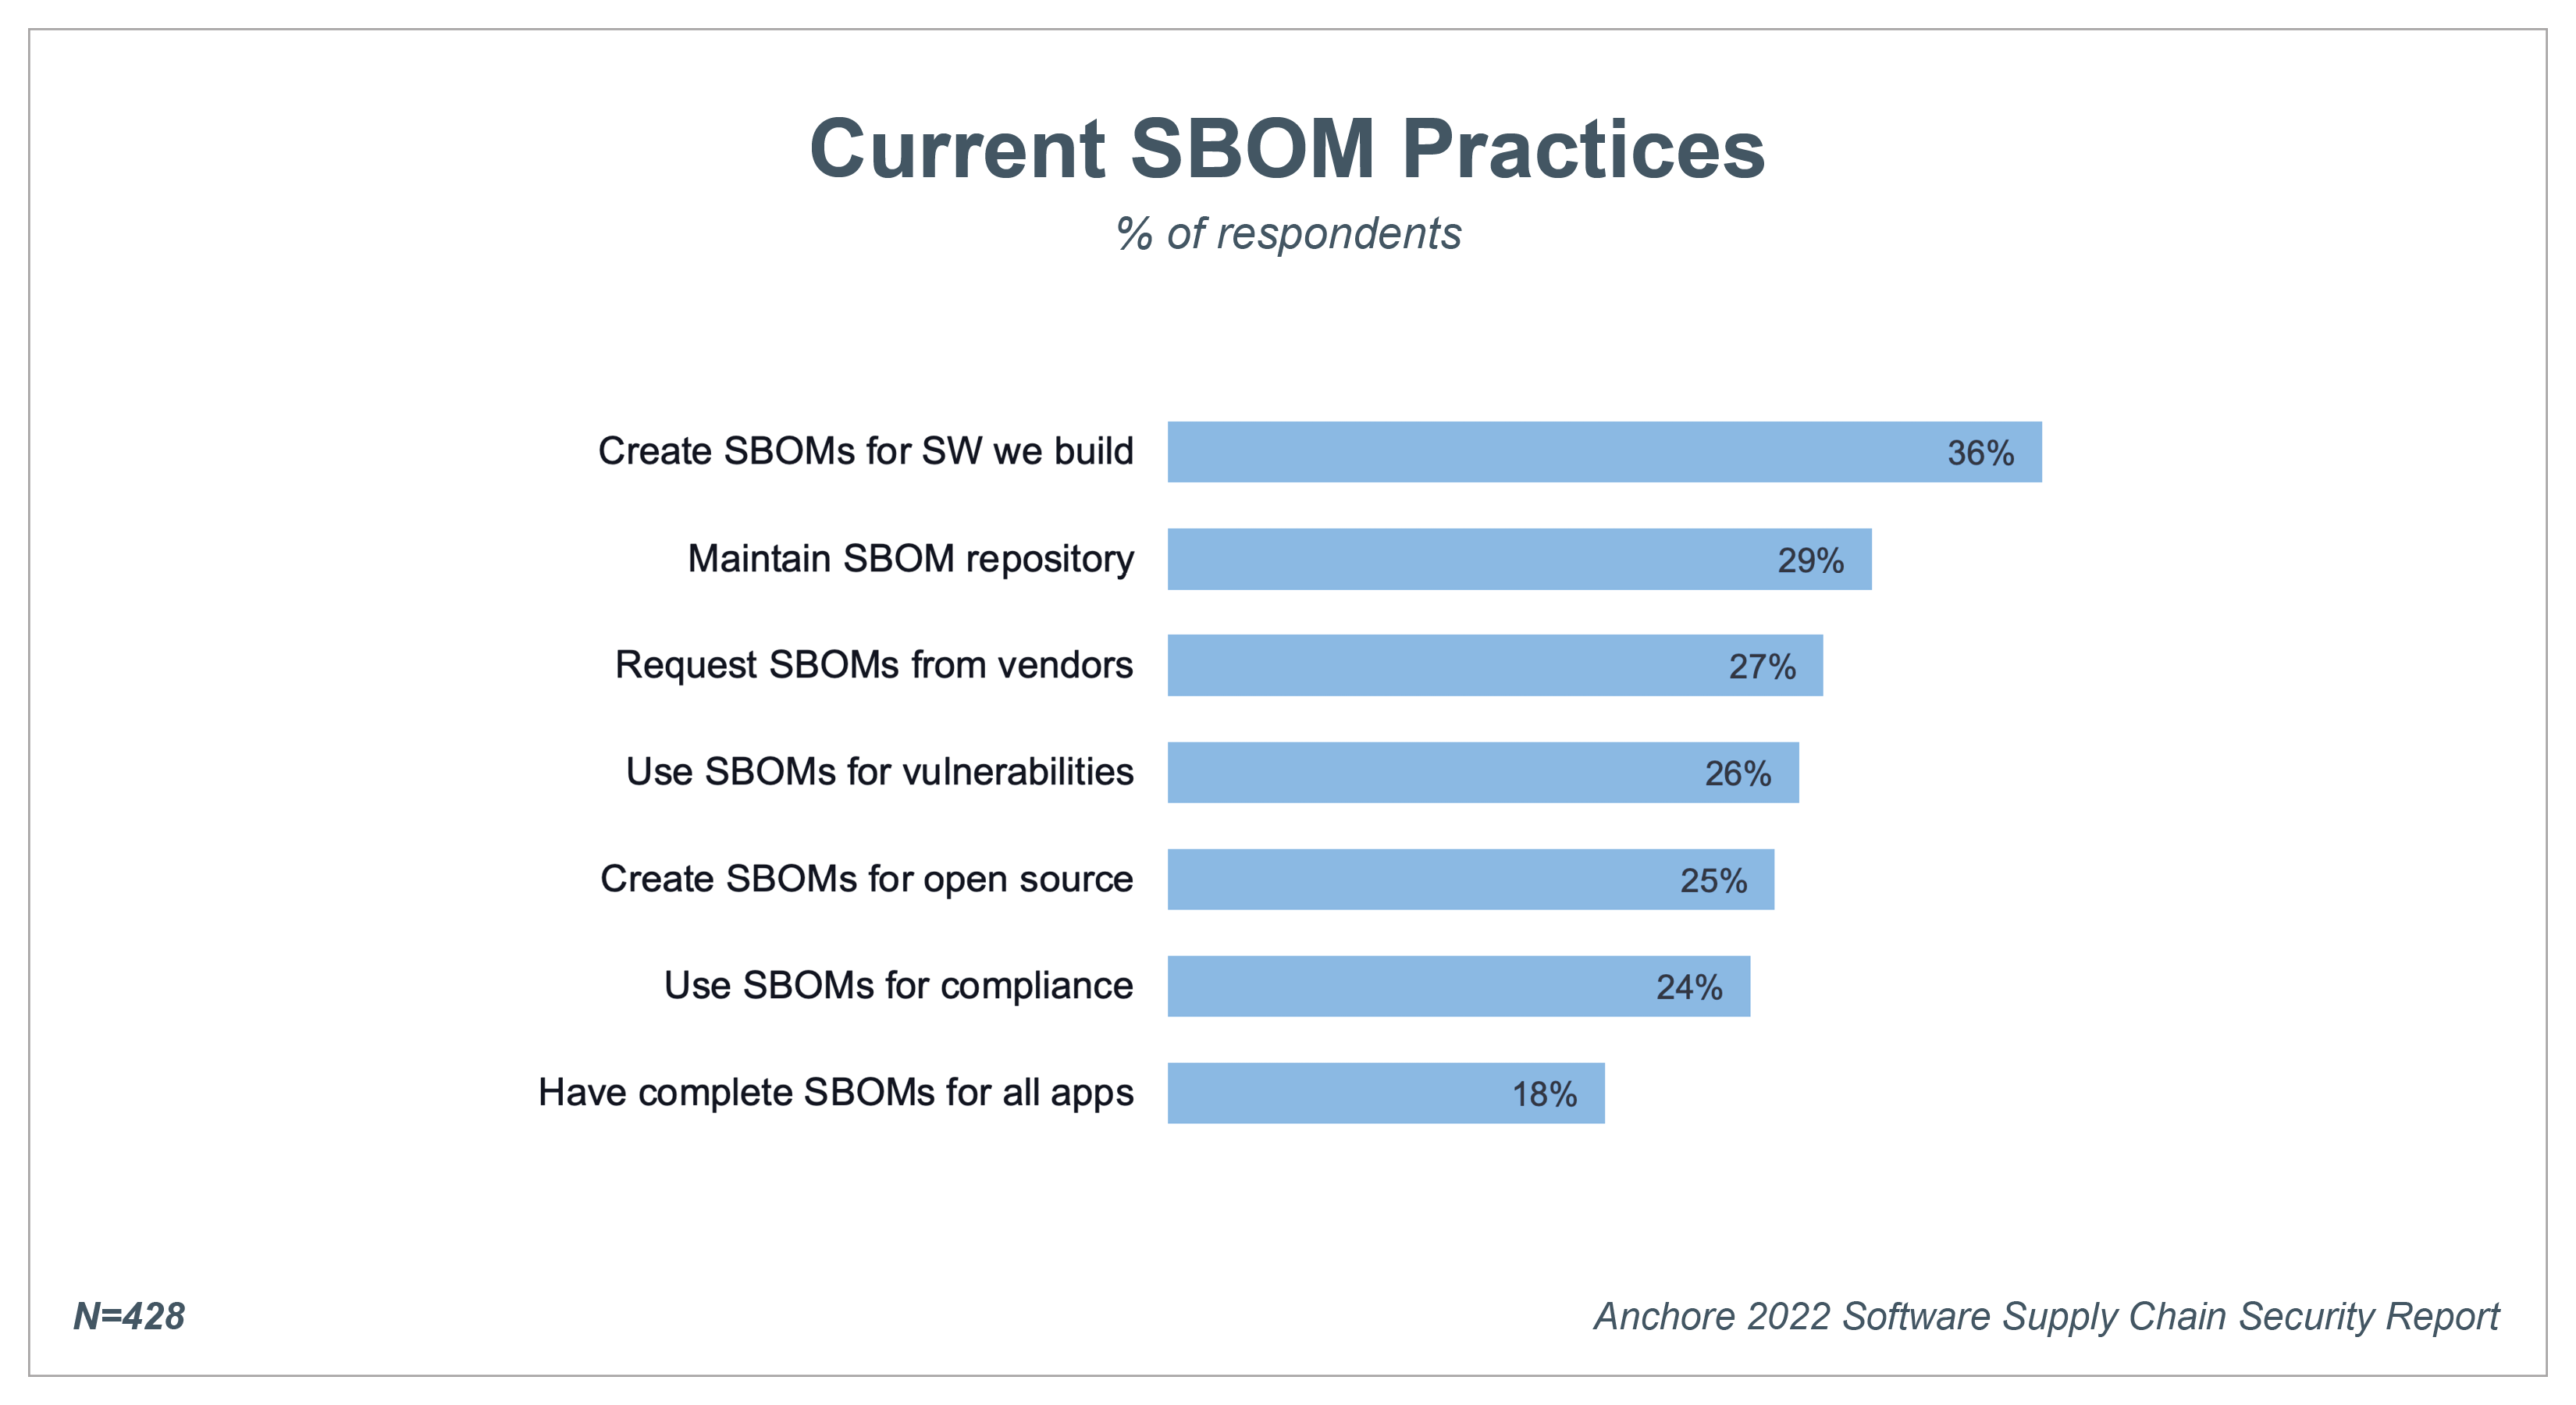 Bar chart with a breakdown of SBOM practices to improve software supply chain security